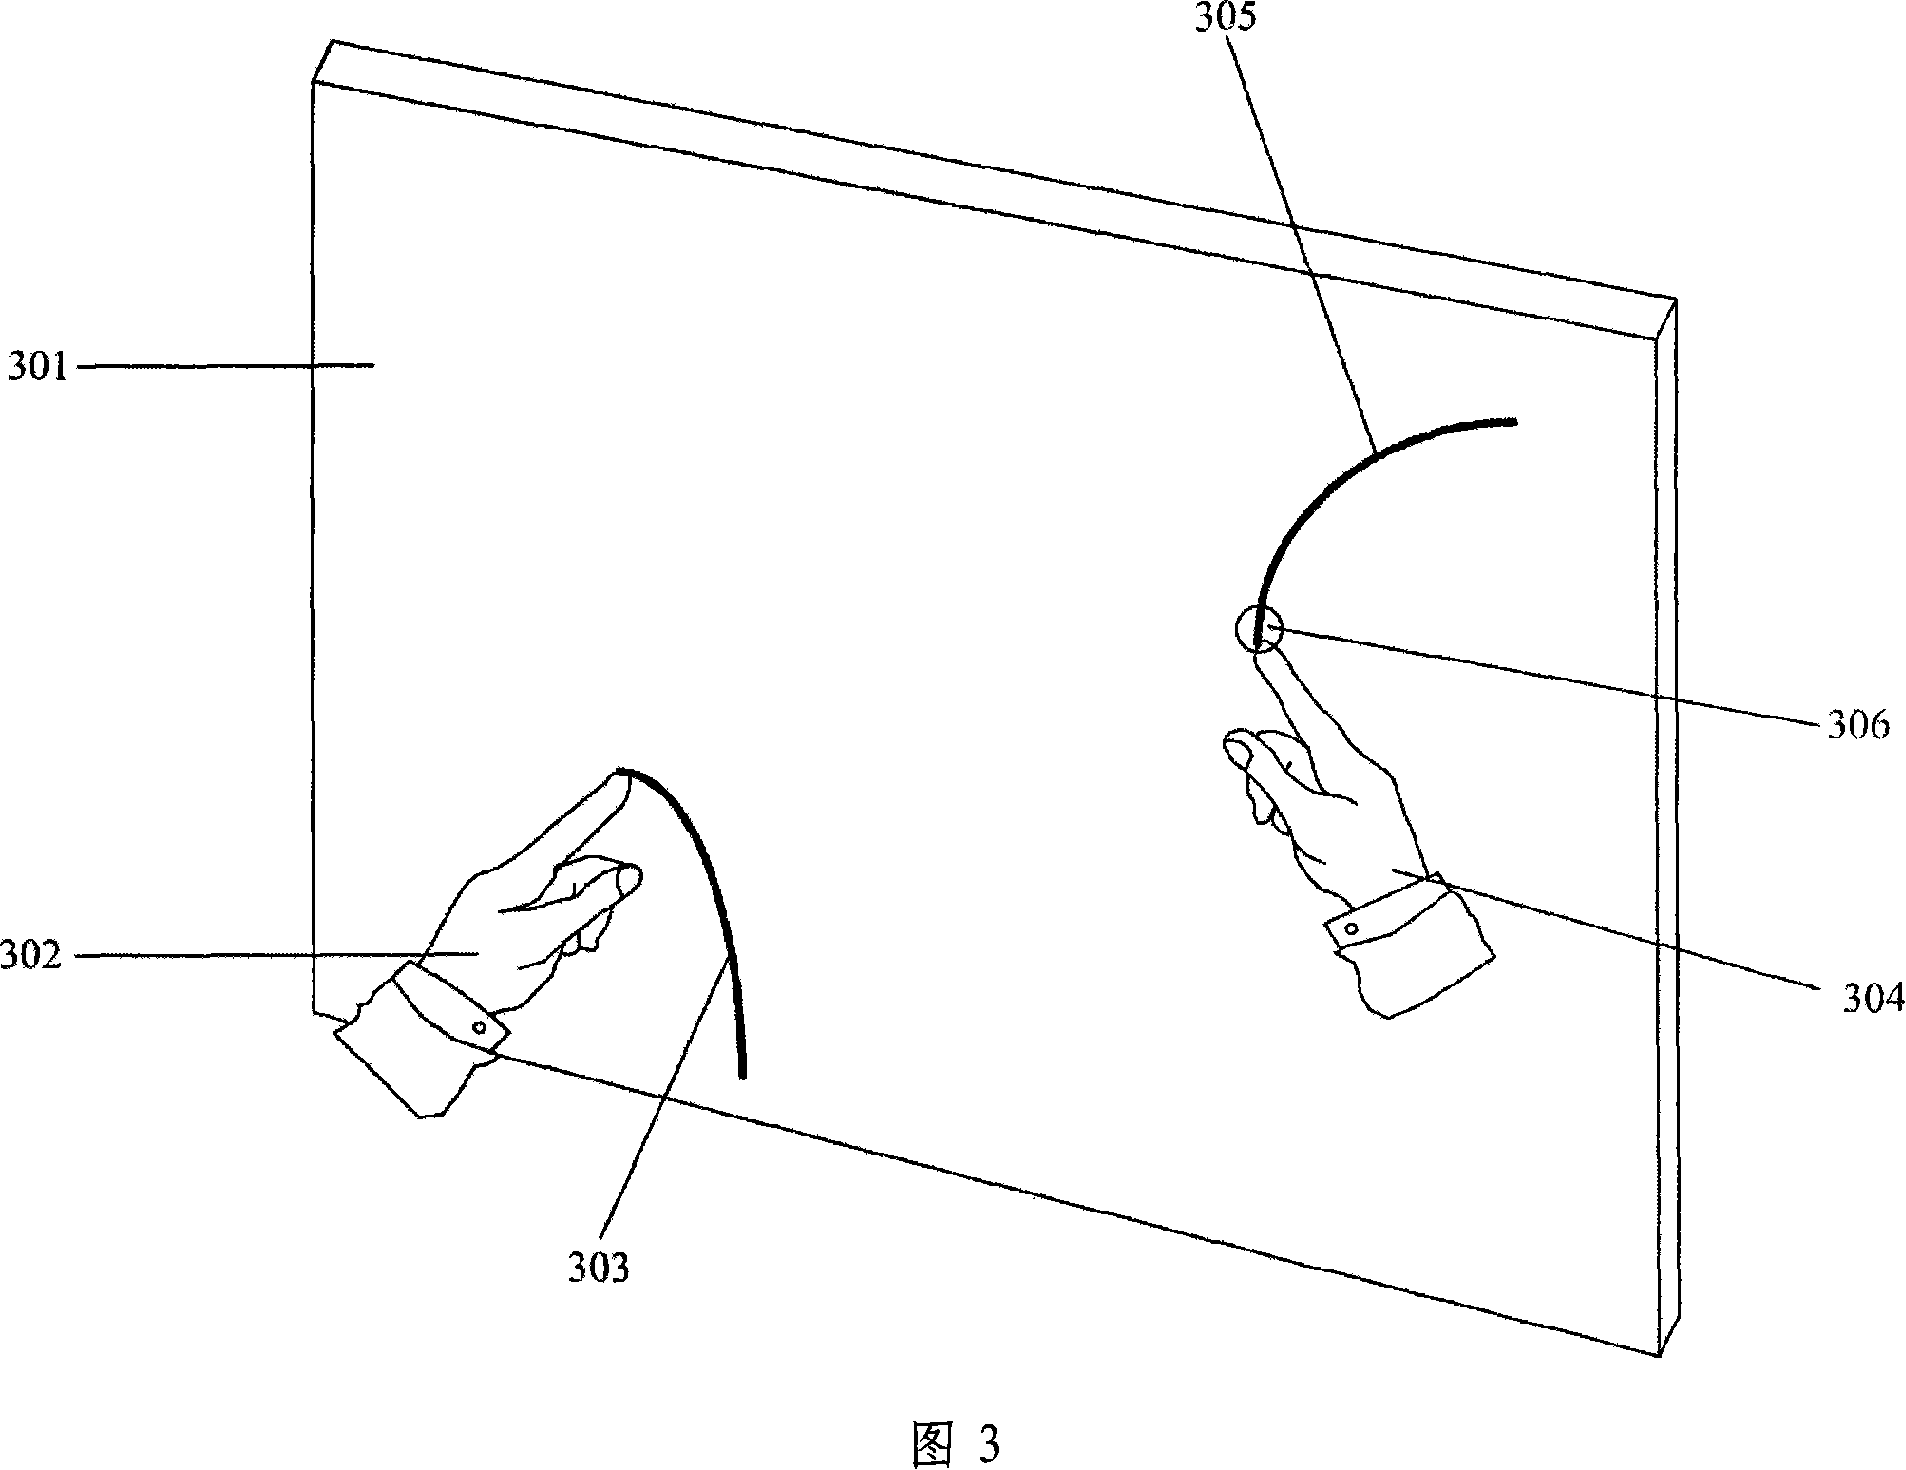 Multiple point touch localization method